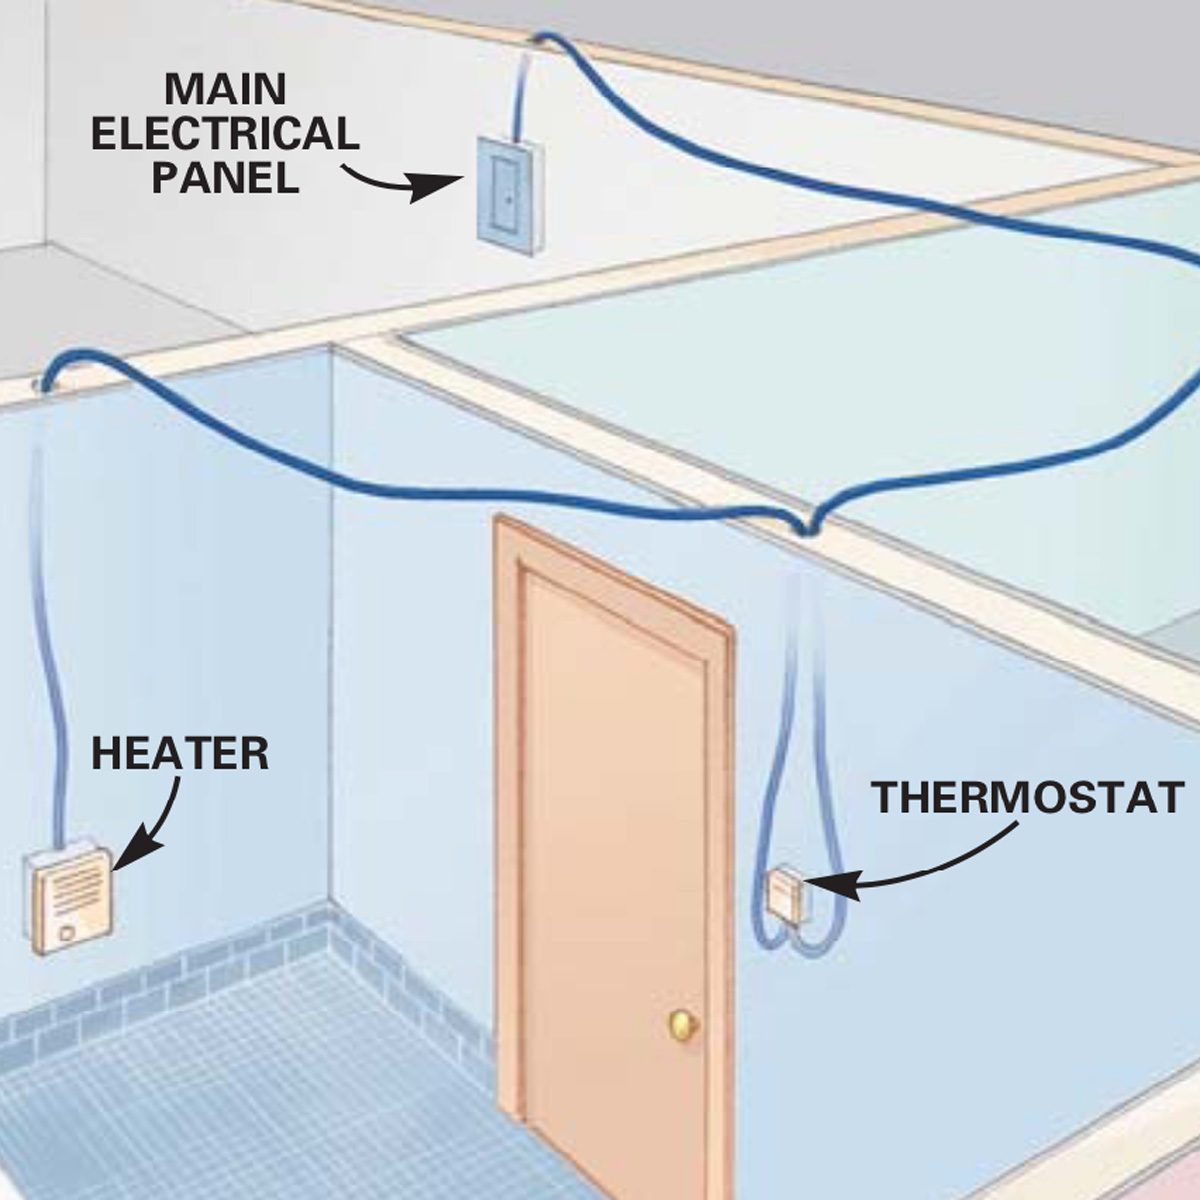 A How-To Guide on Electric Heater Installation